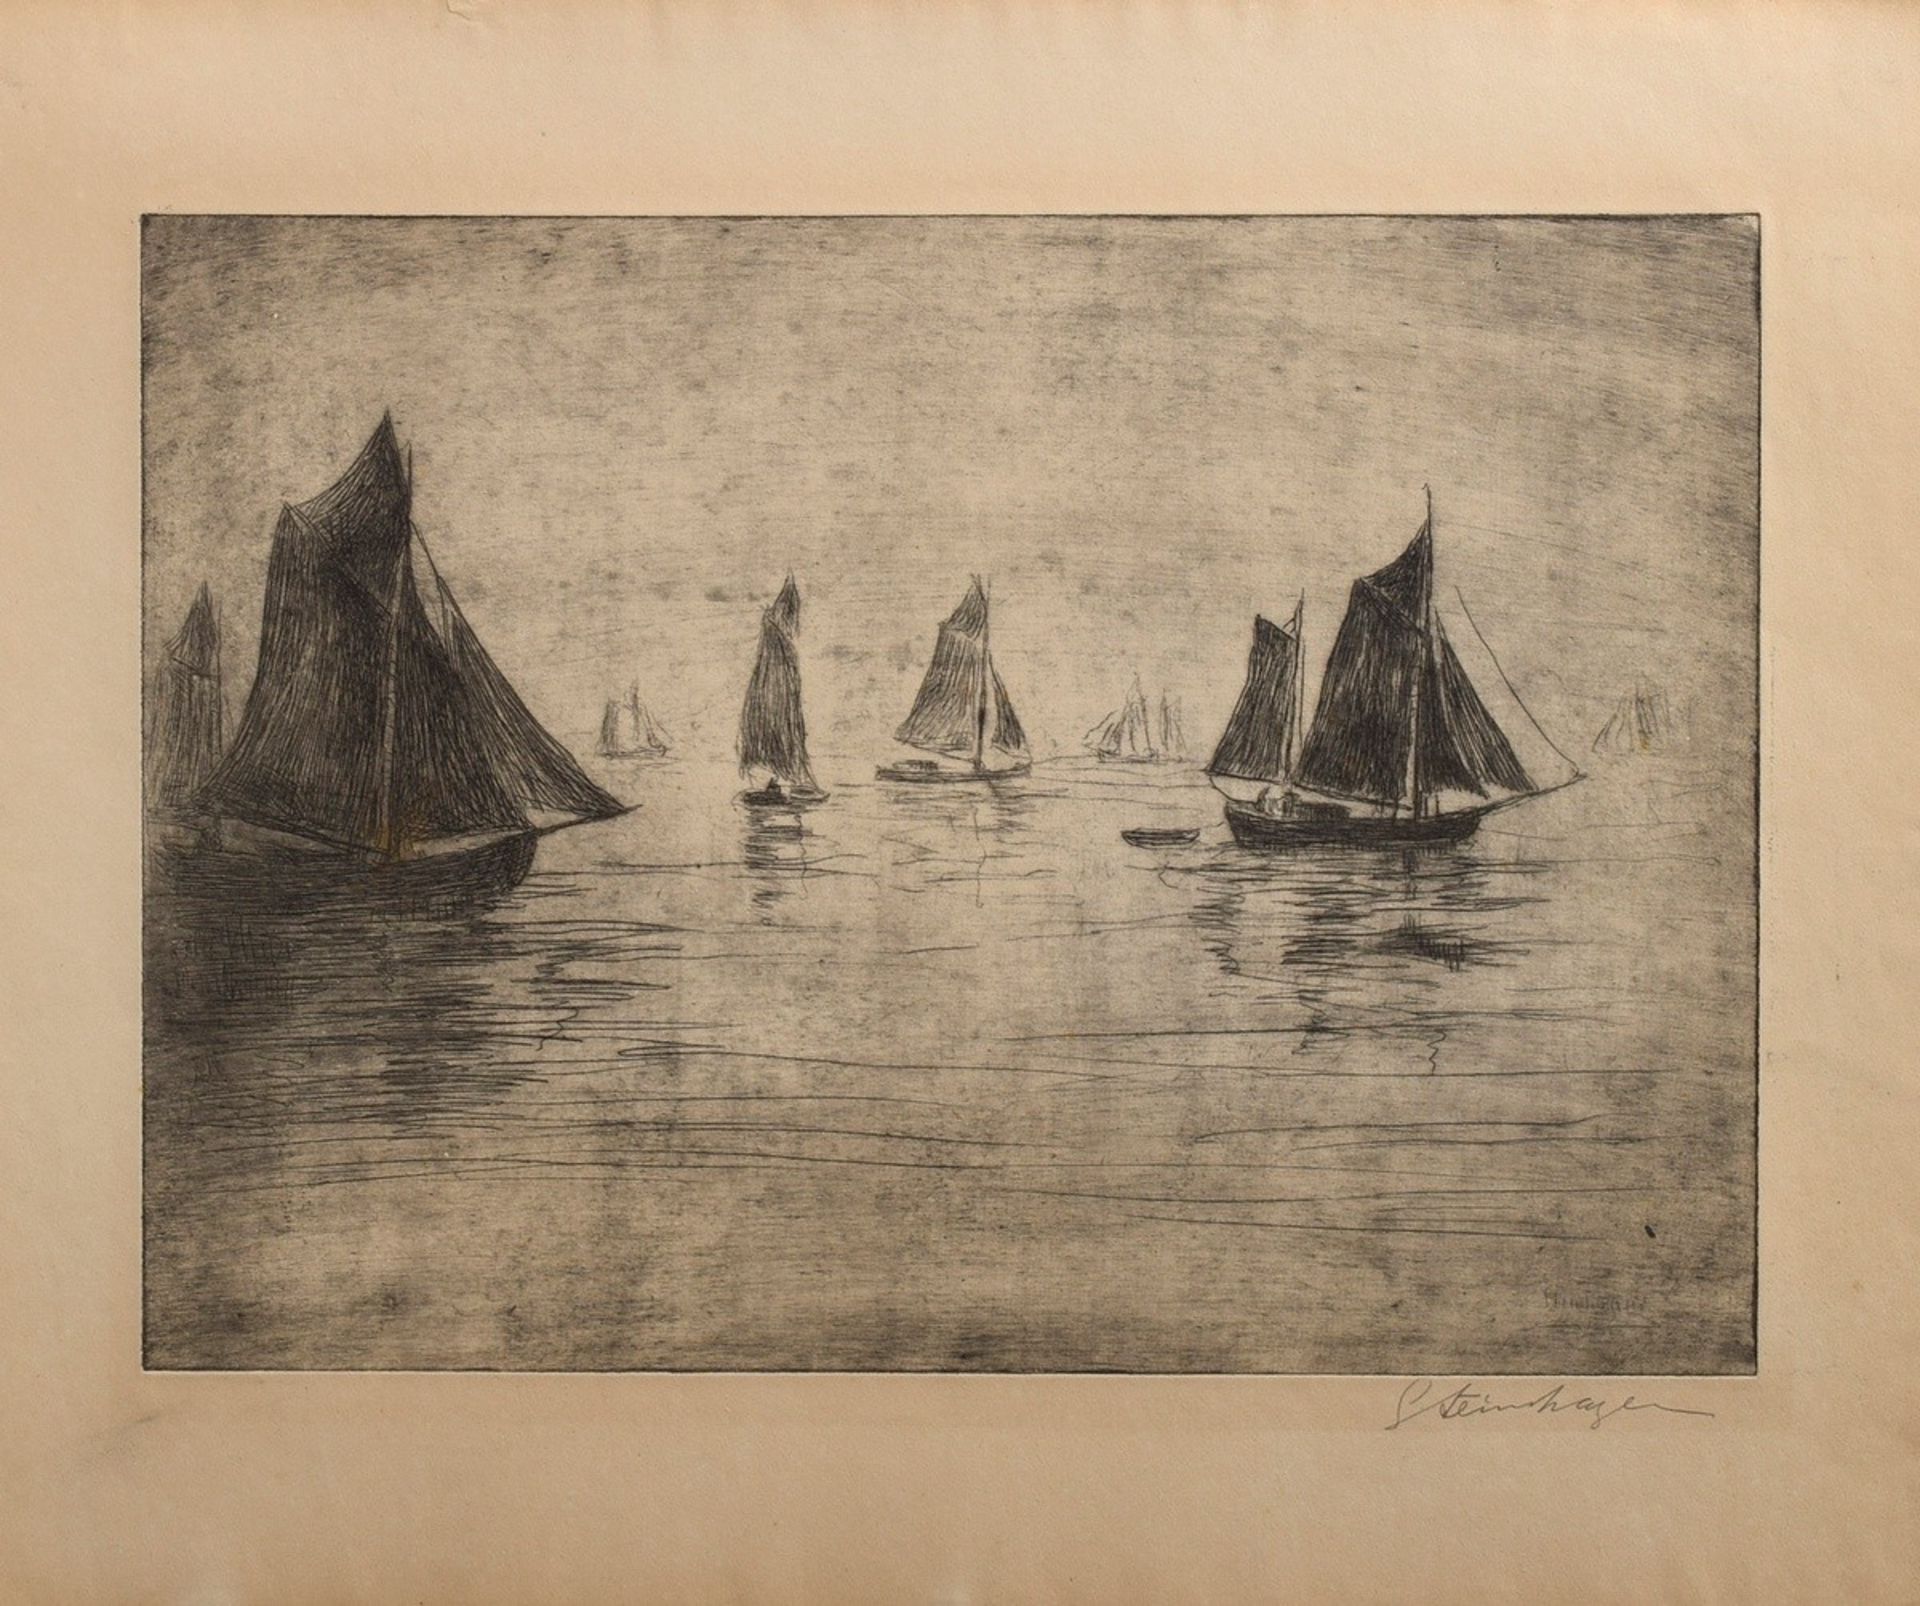 Steinhagen, Heinrich (1880-1948) "Sailor on a calm sea", etching, signed on the plate and lower par